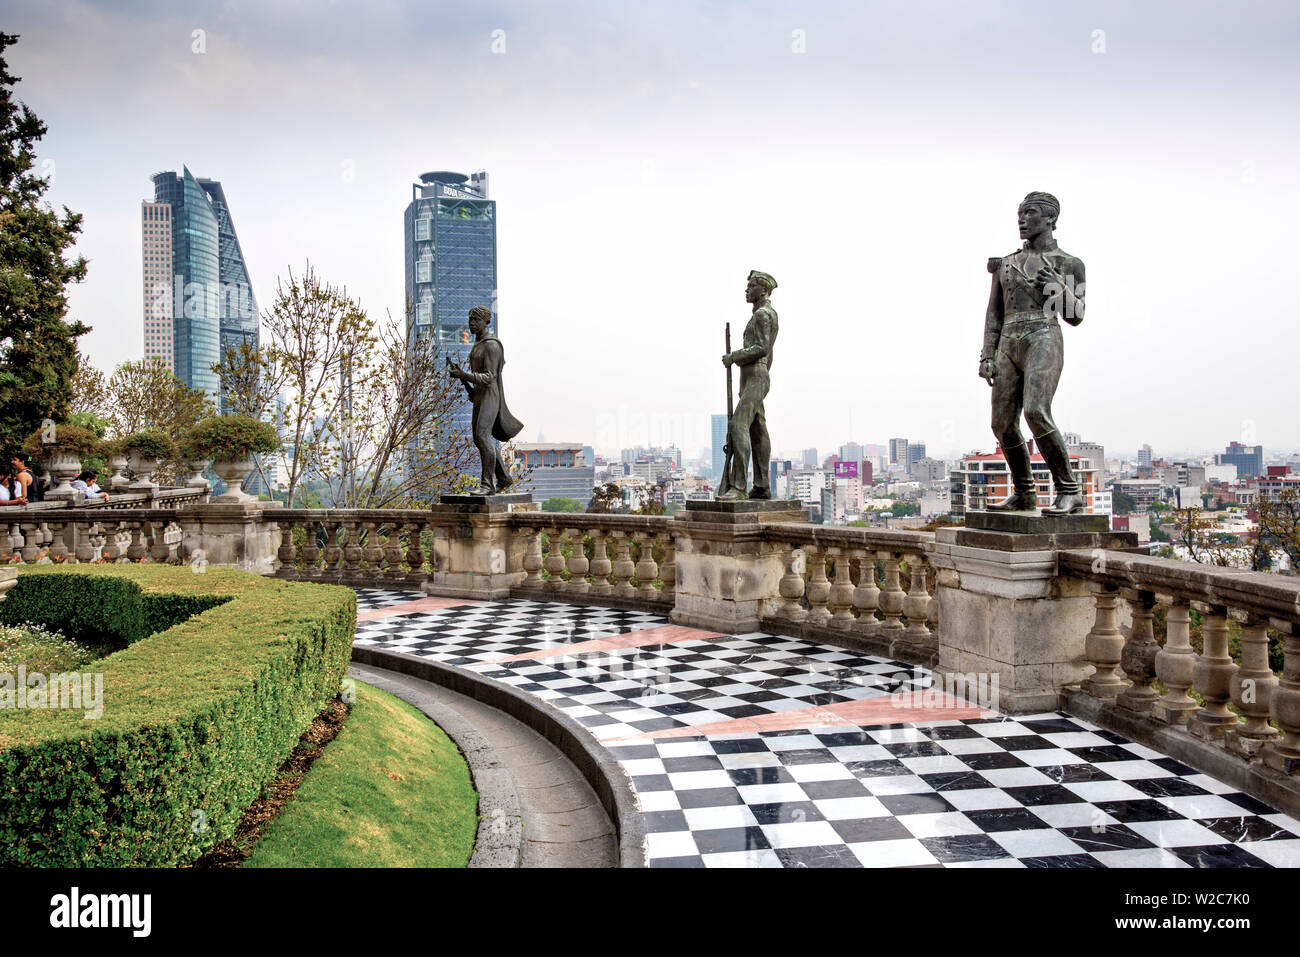 Mexico, Mexico City, Statues of Los Ninos Heroes, Chapultepec Castle, National Museum of History, Chapultepec Hill, Six Young Cadets Died Defending Chapultepec Castle During the Mexican-American War, Battle of Chapultepec Stock Photo